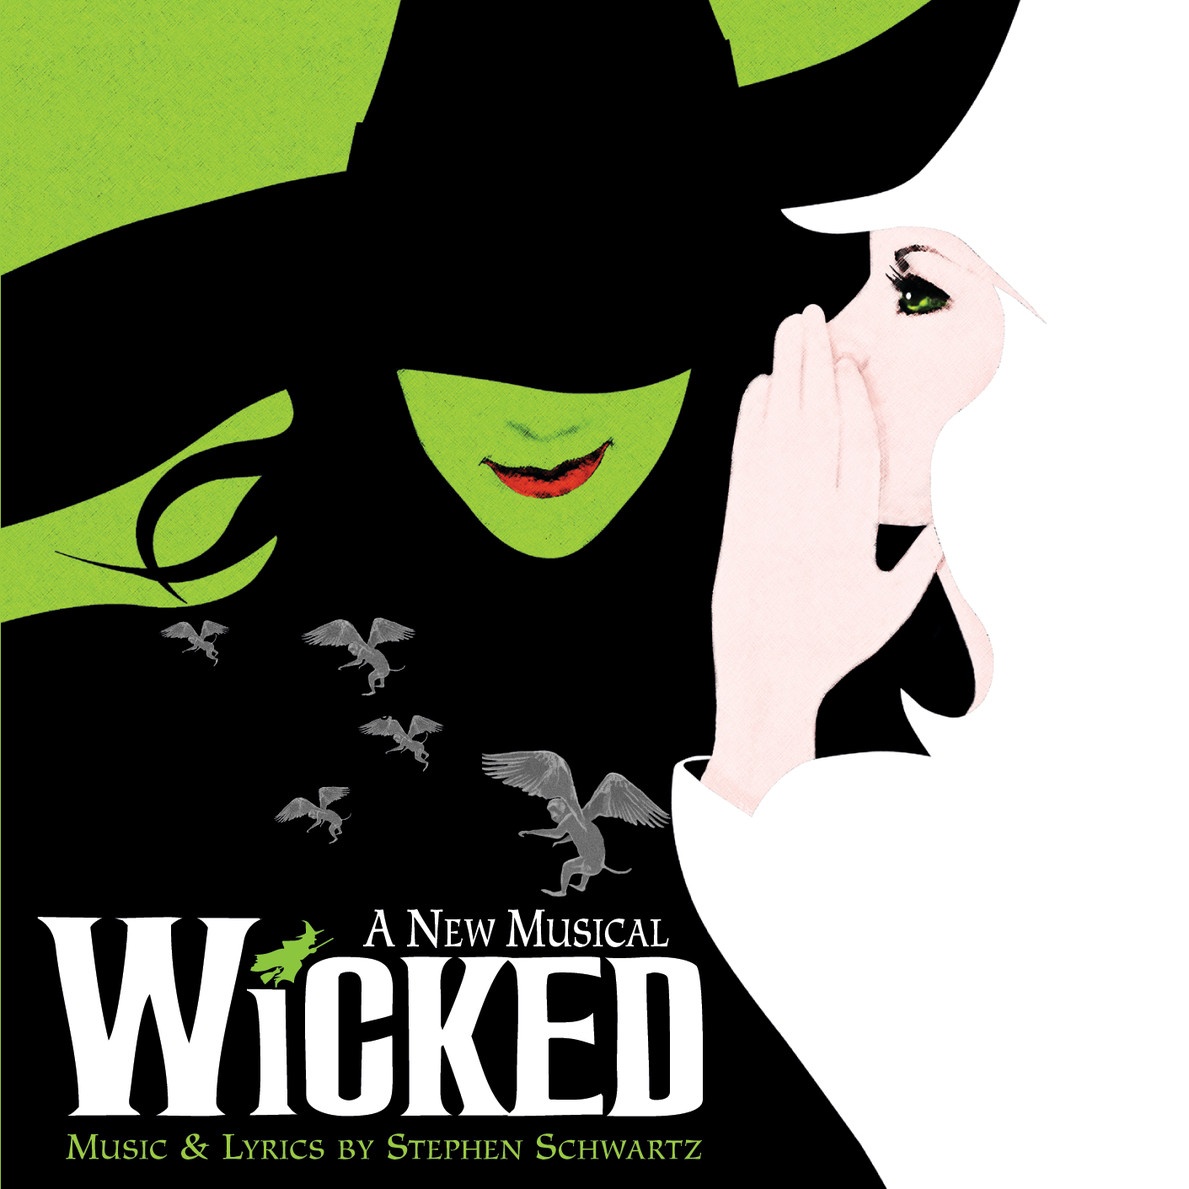 I'm Not That Girl (Reprise) - From "Wicked" Original Broadway Cast Recording/2003